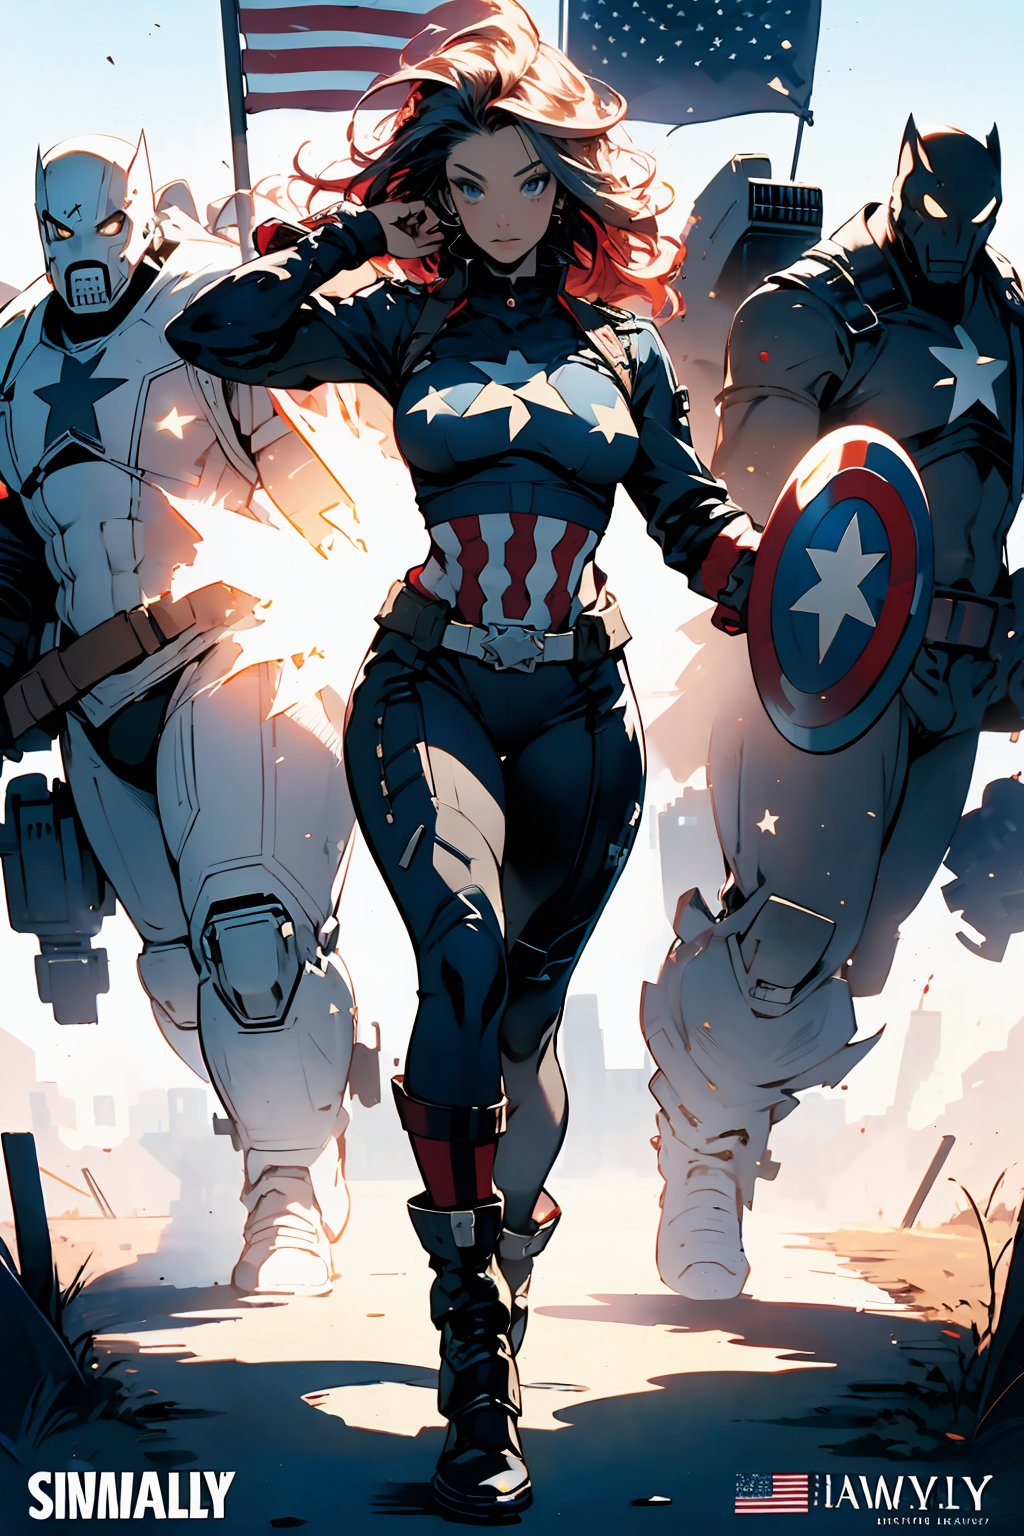 ((Best quality)), ((masterpiece)), (detailed: 1.4), Absurd, Captain America, (((flag))), Mature woman, muscular, beautiful, (((full body)))), giant robot pilot, wild with perfect body, bare thighs, dark blue clothing with white stars, red with white stripes, thong, with the colors of the United States flag, sensual pose, pose with attitude, big breasts, technological scenery, manga style with (((Simon Bisley))) artsyle